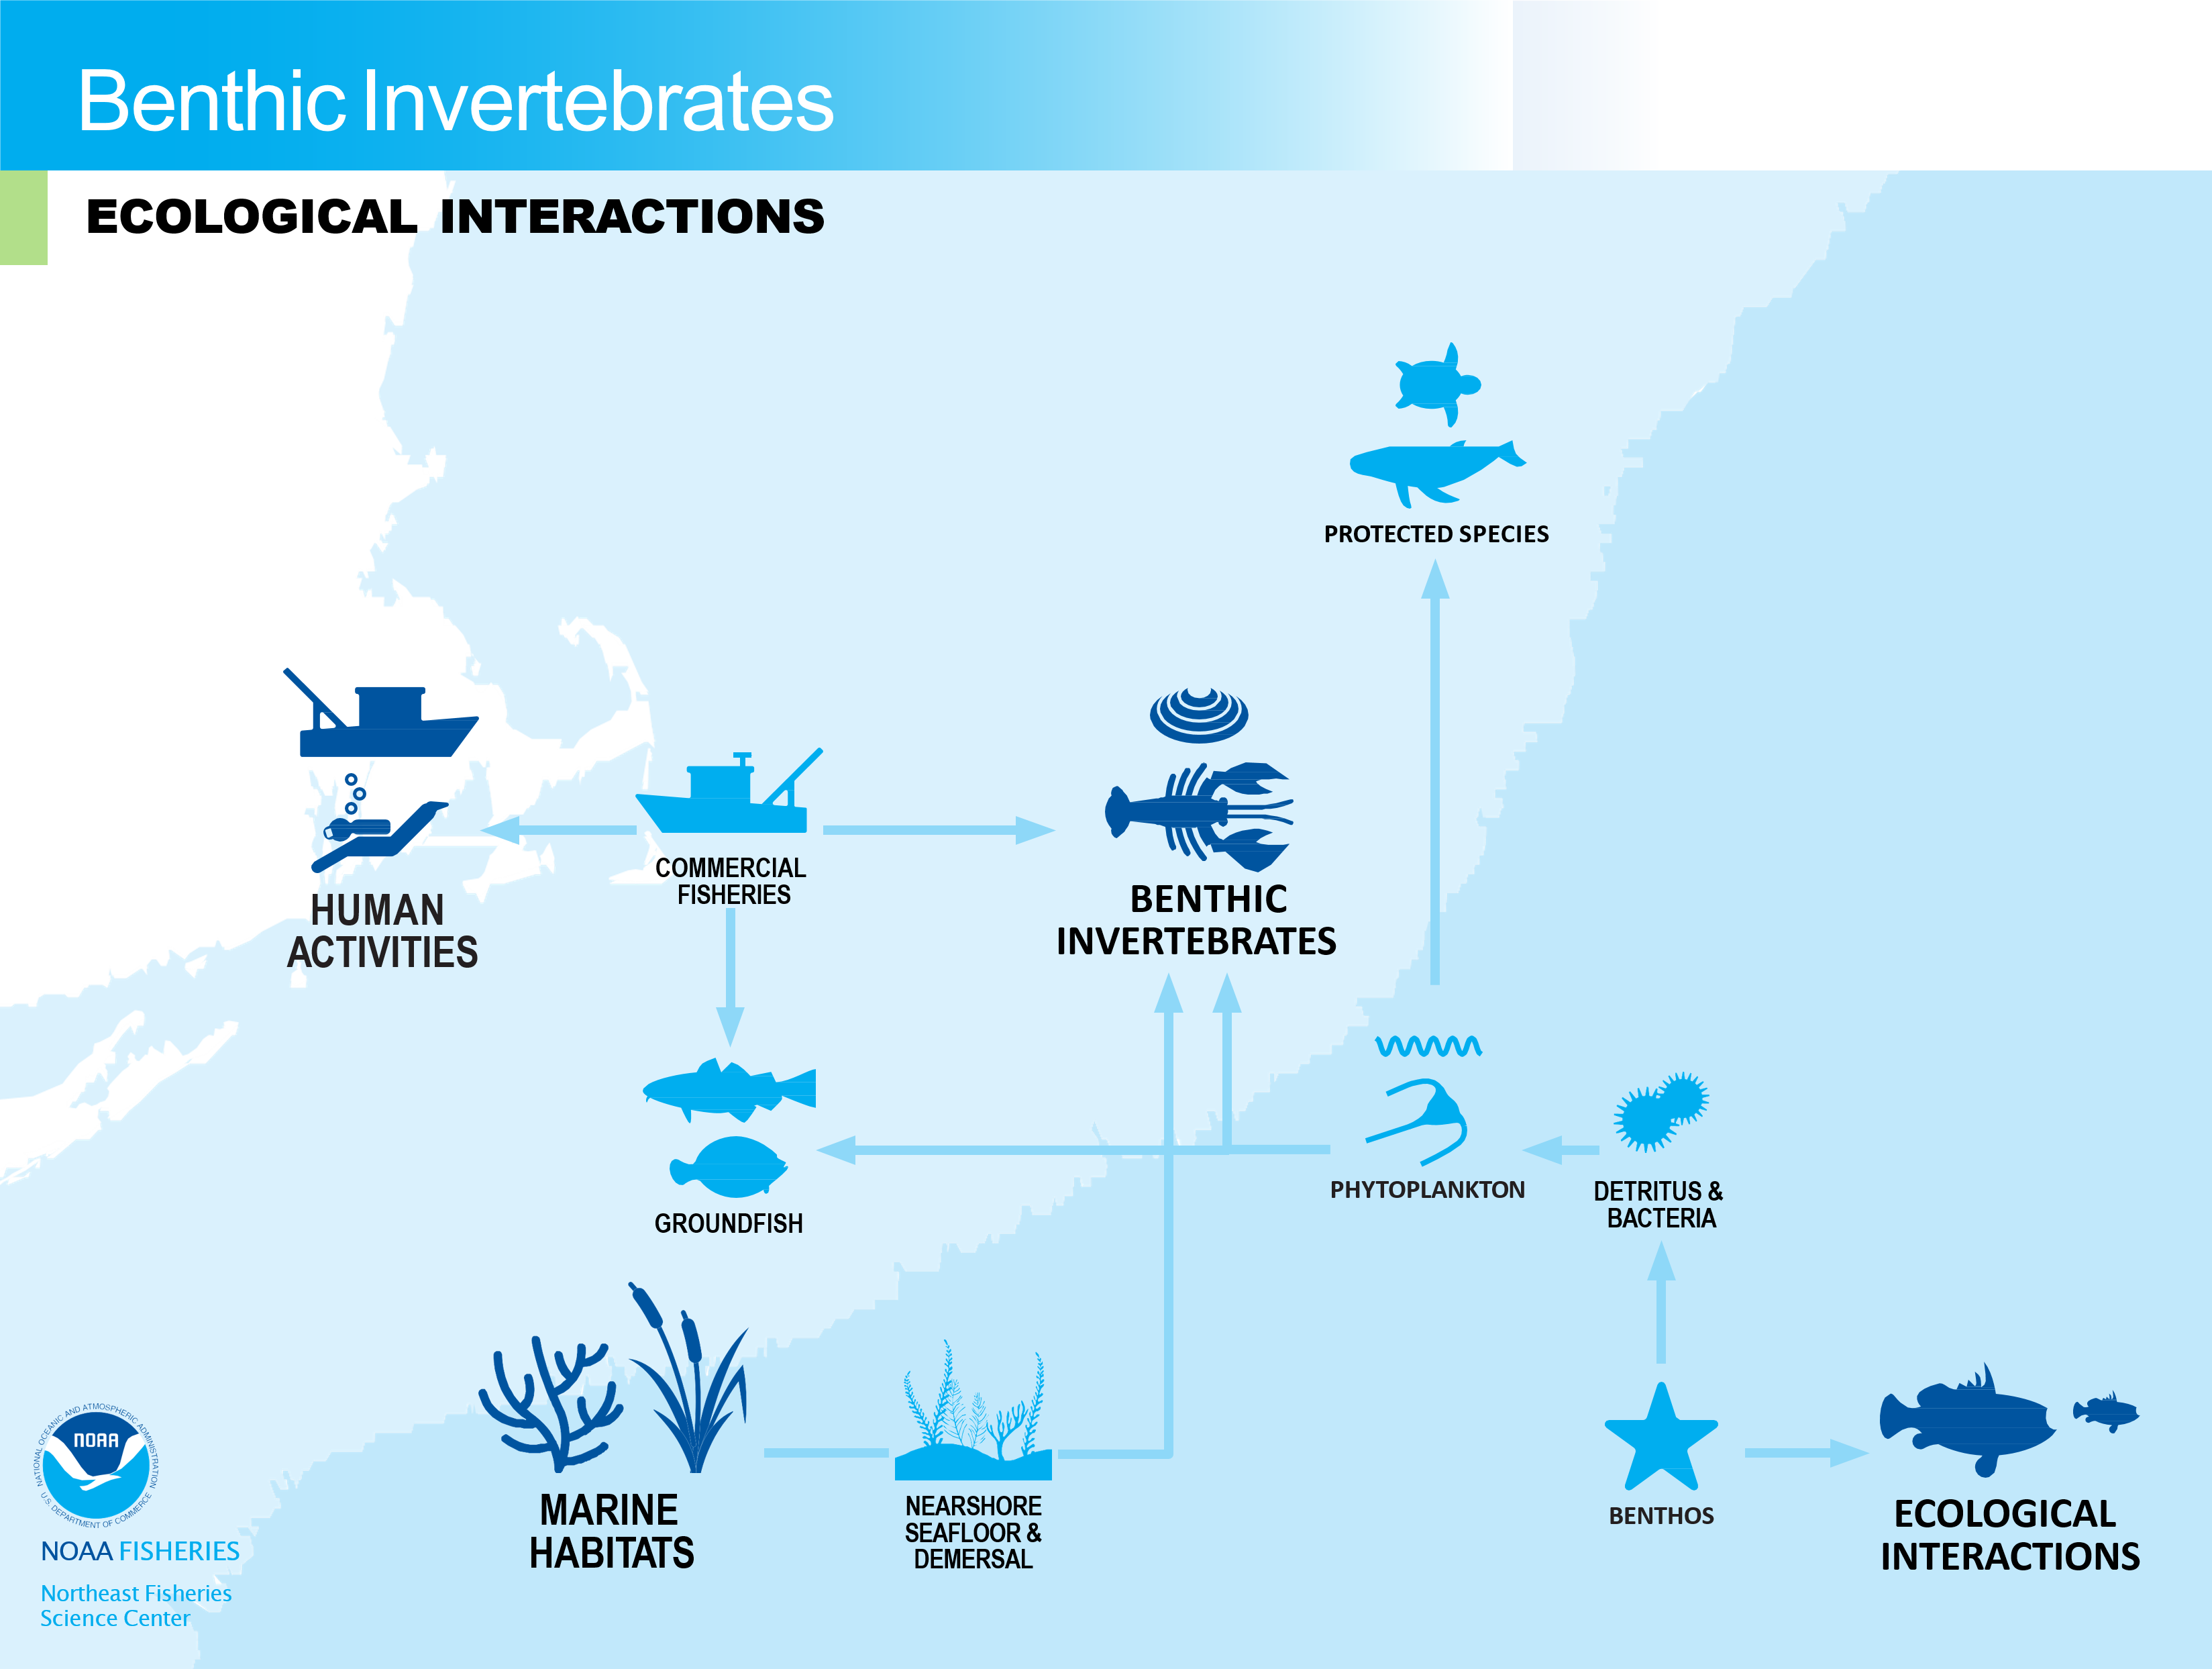 Conceptual model of benthic invertebrates ecological interactions in the NE-LME.